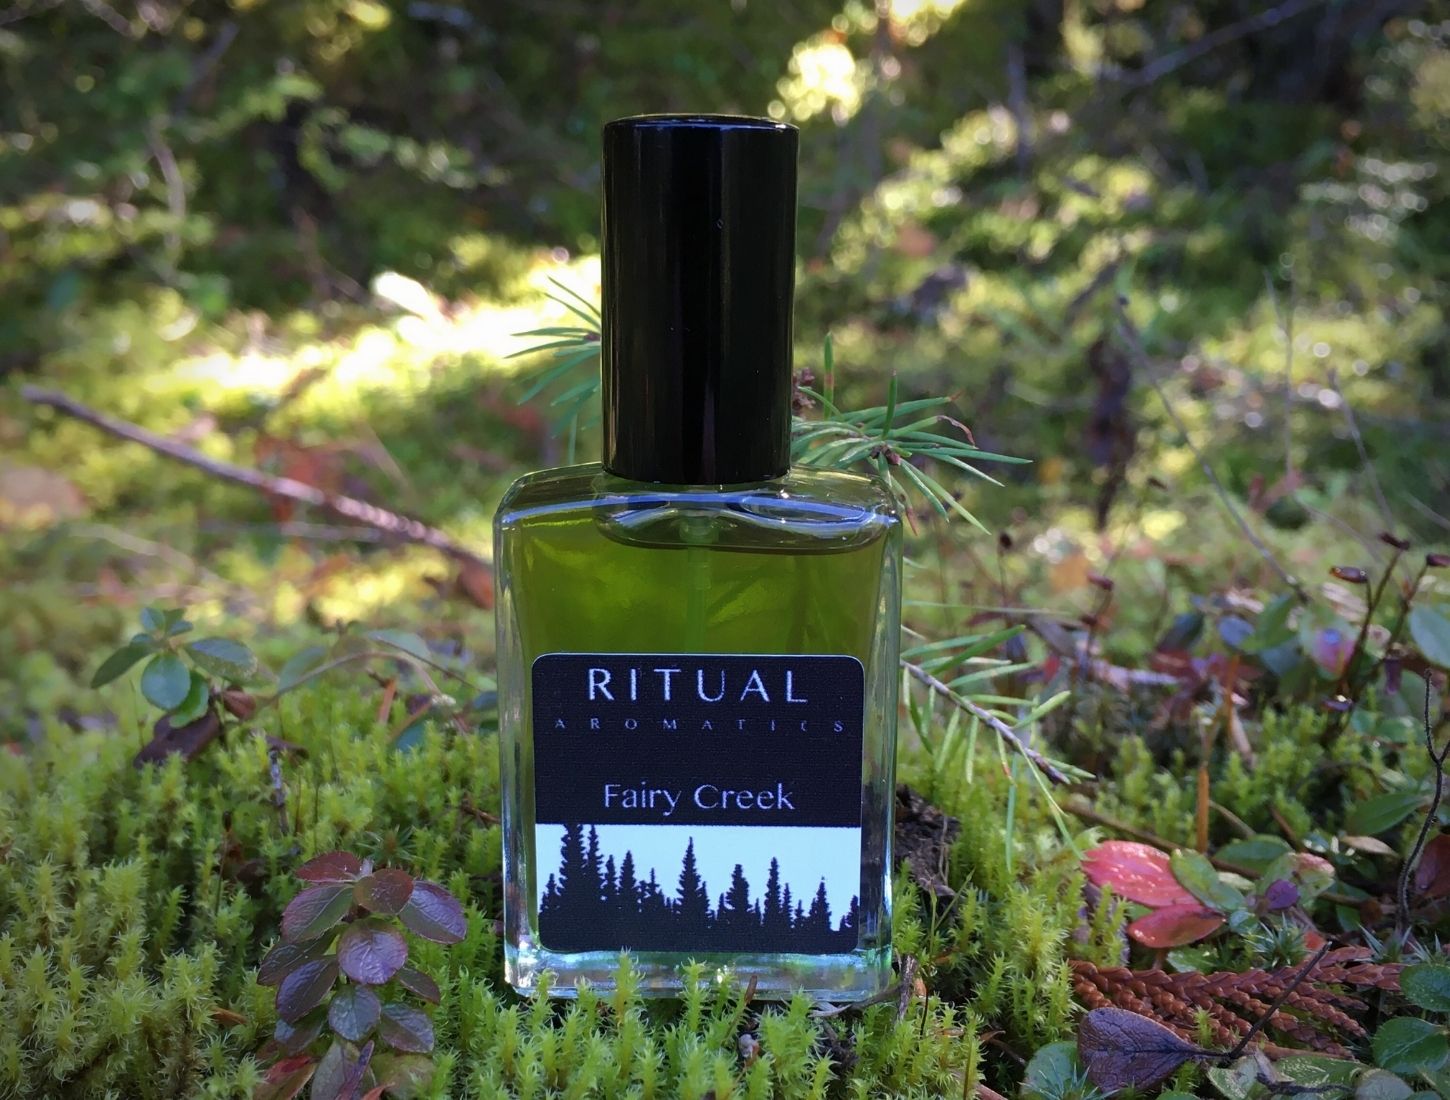 Ritual Aromatics Natural and Botanical Perfume bottle in a forest on moss with sunshine